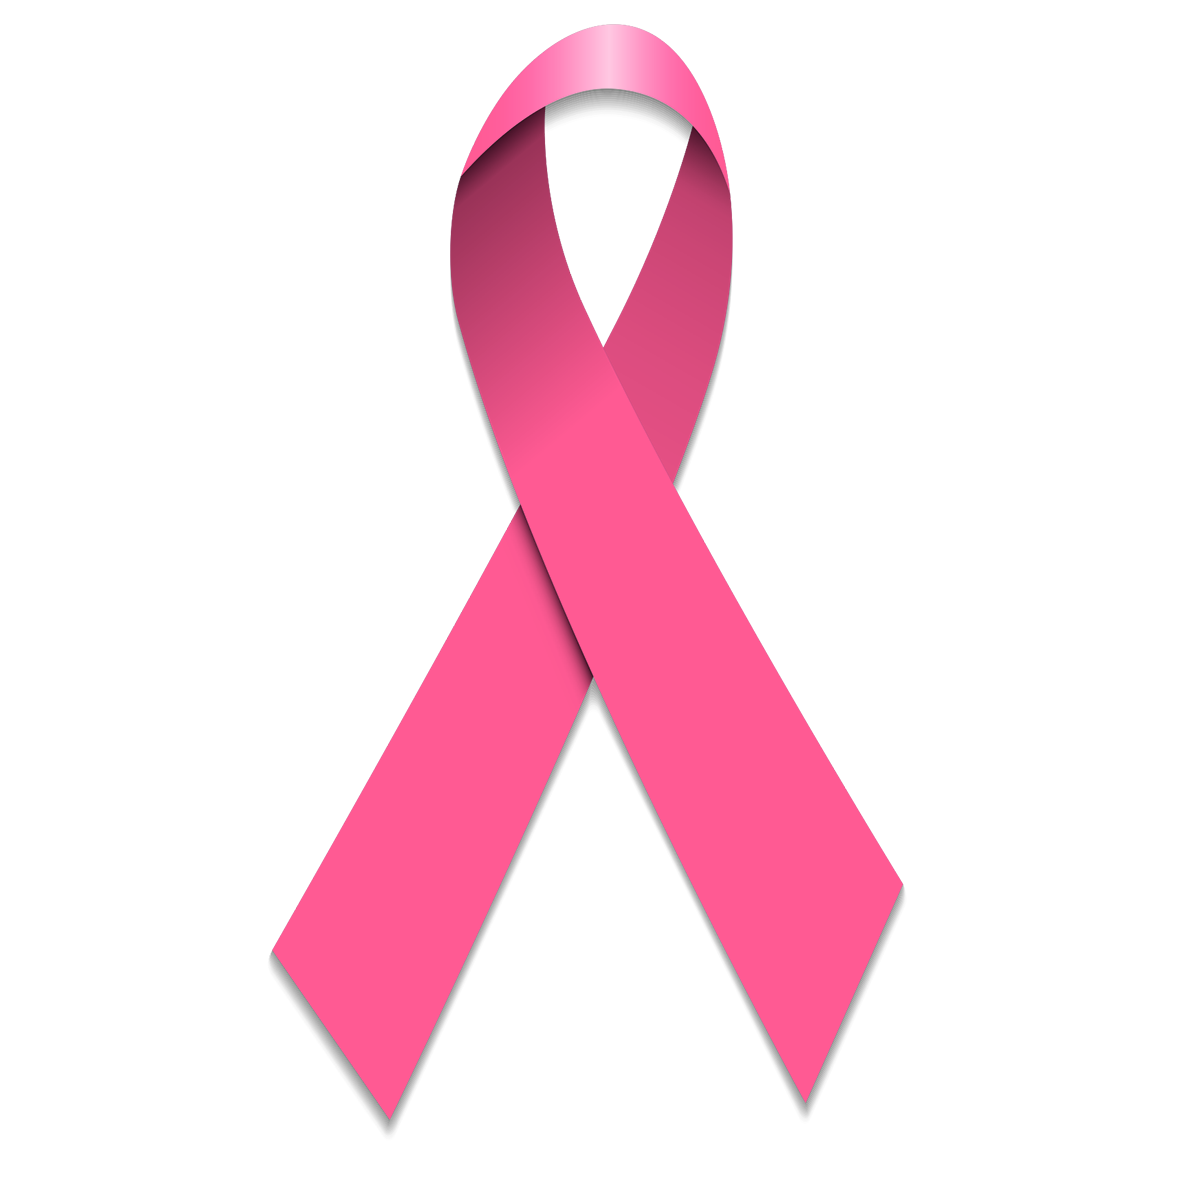 4,000 women suffering from breast cancer each year, 1000 die annually: NCCP